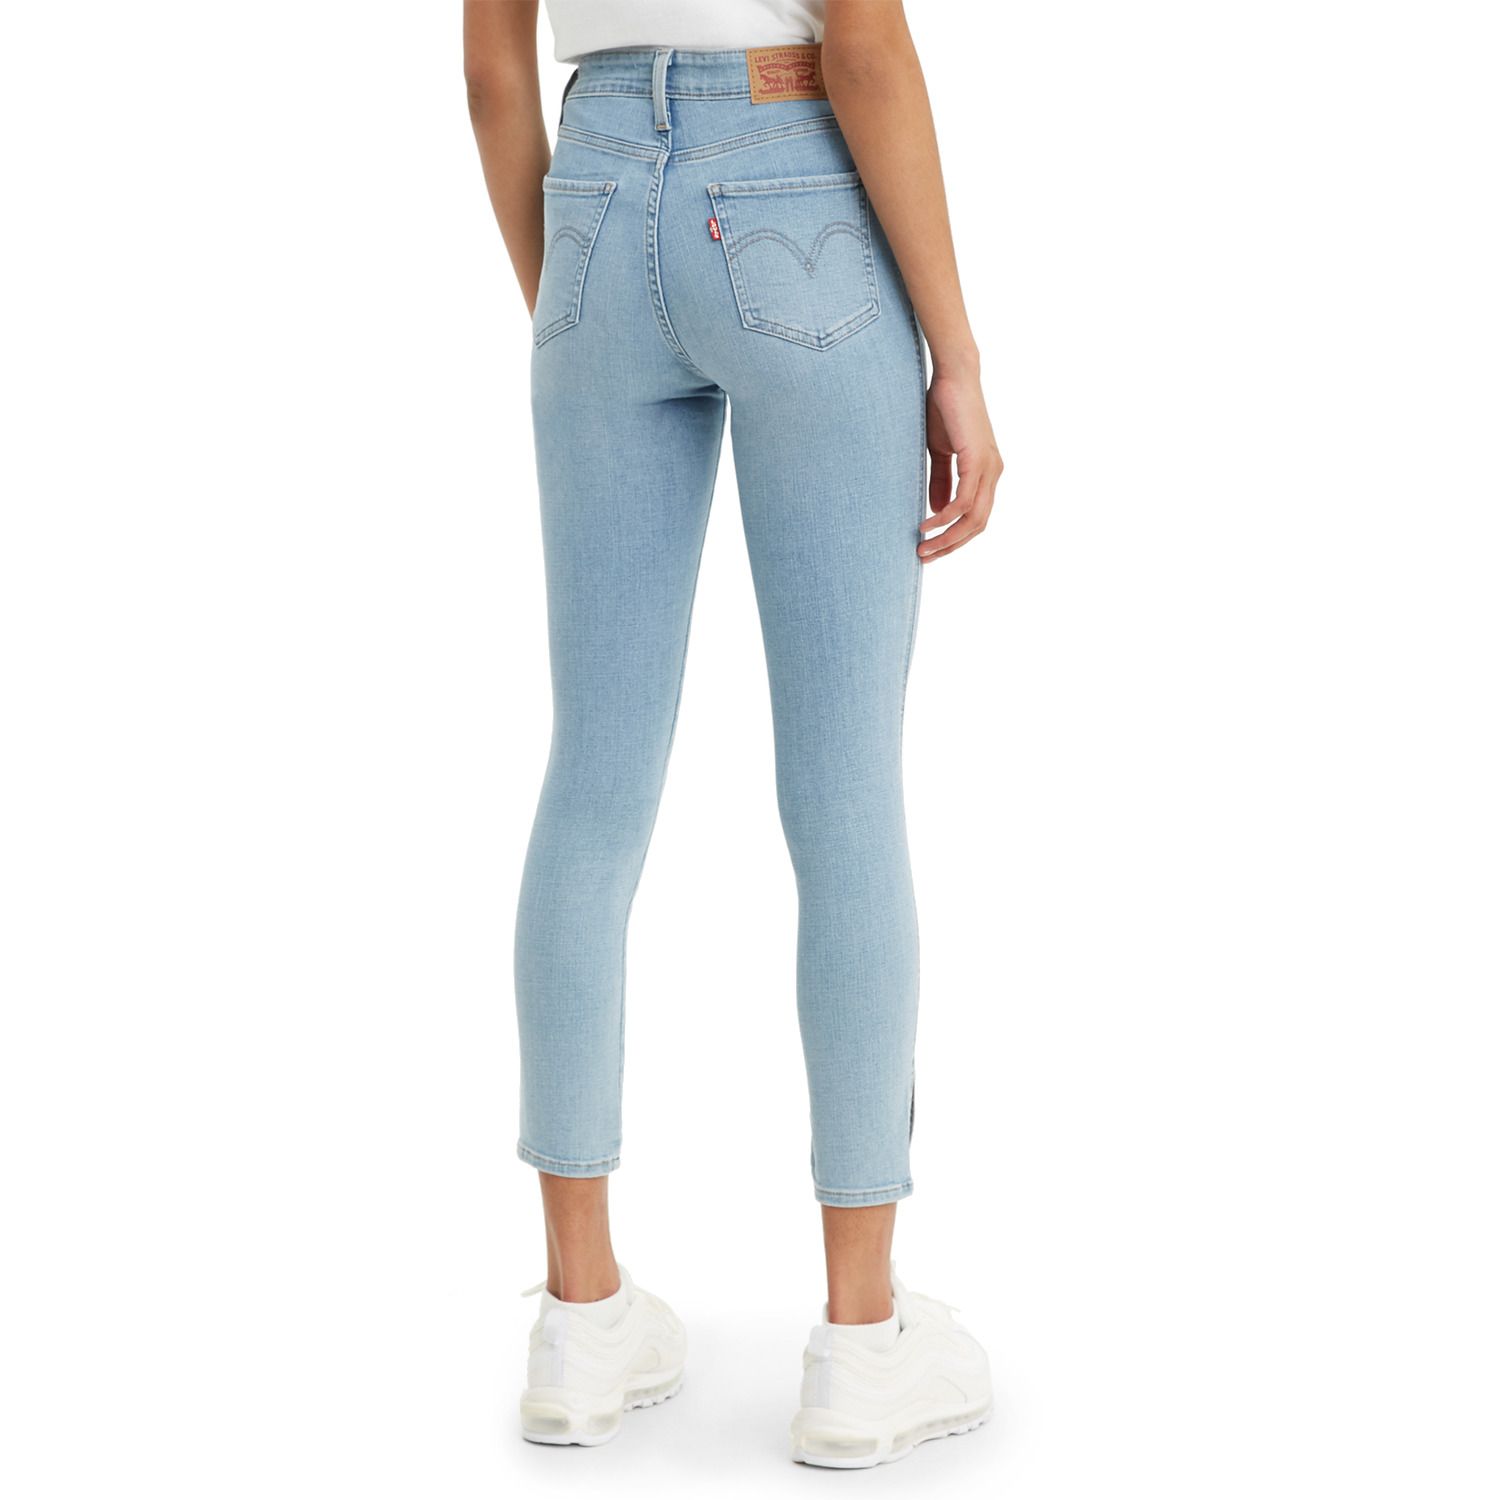 Clearance Juniors Jeans - Bottoms 